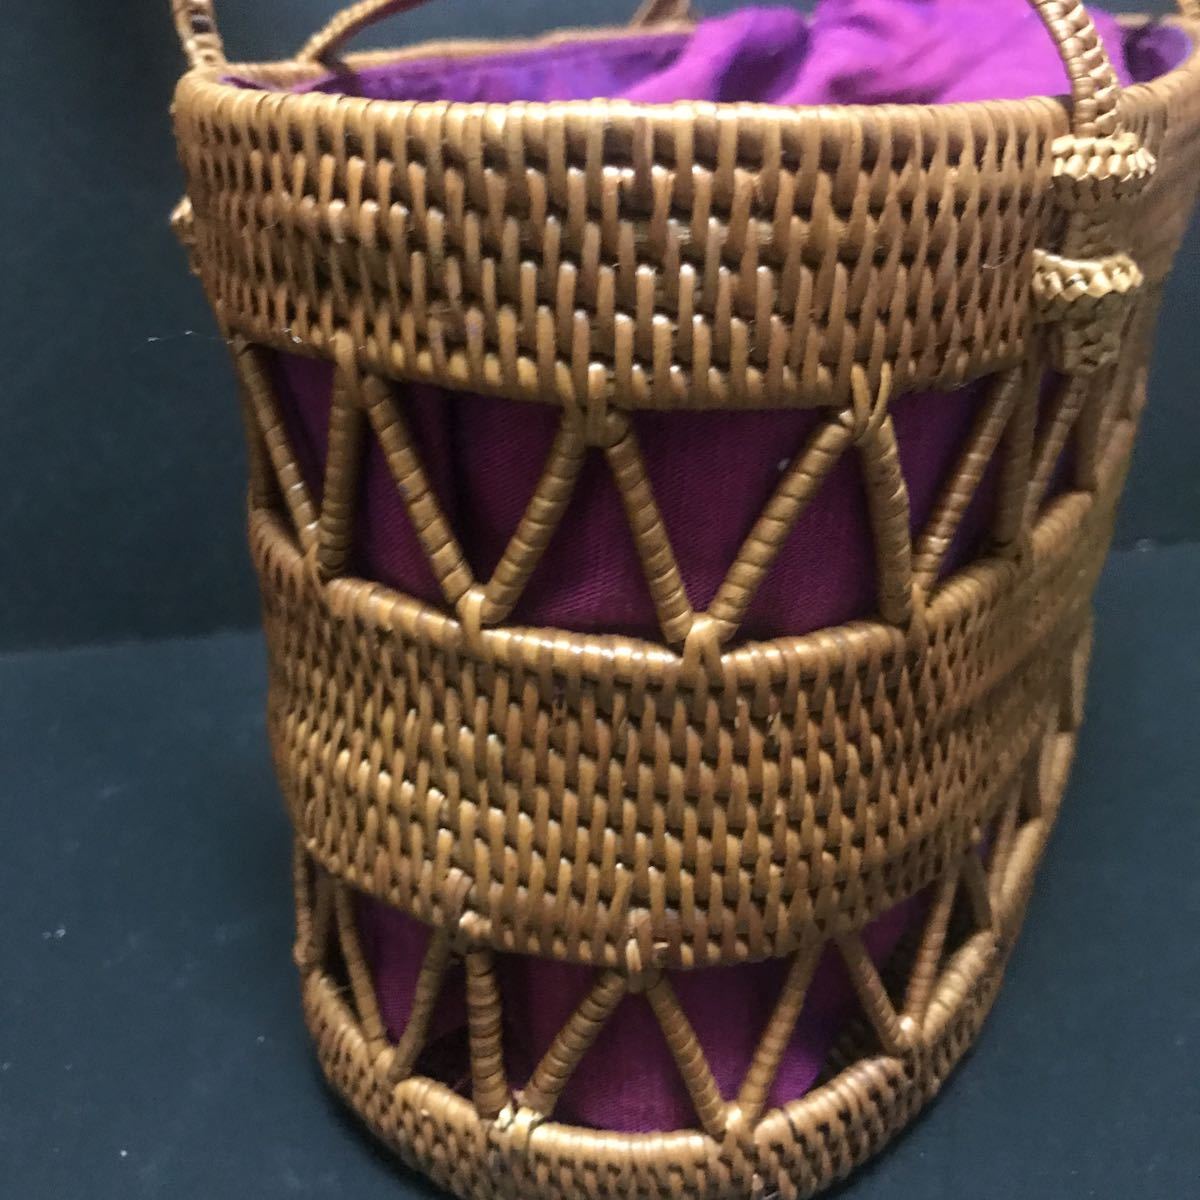 ata basket bag inside cloth attaching beautiful goods tradition industrial arts 